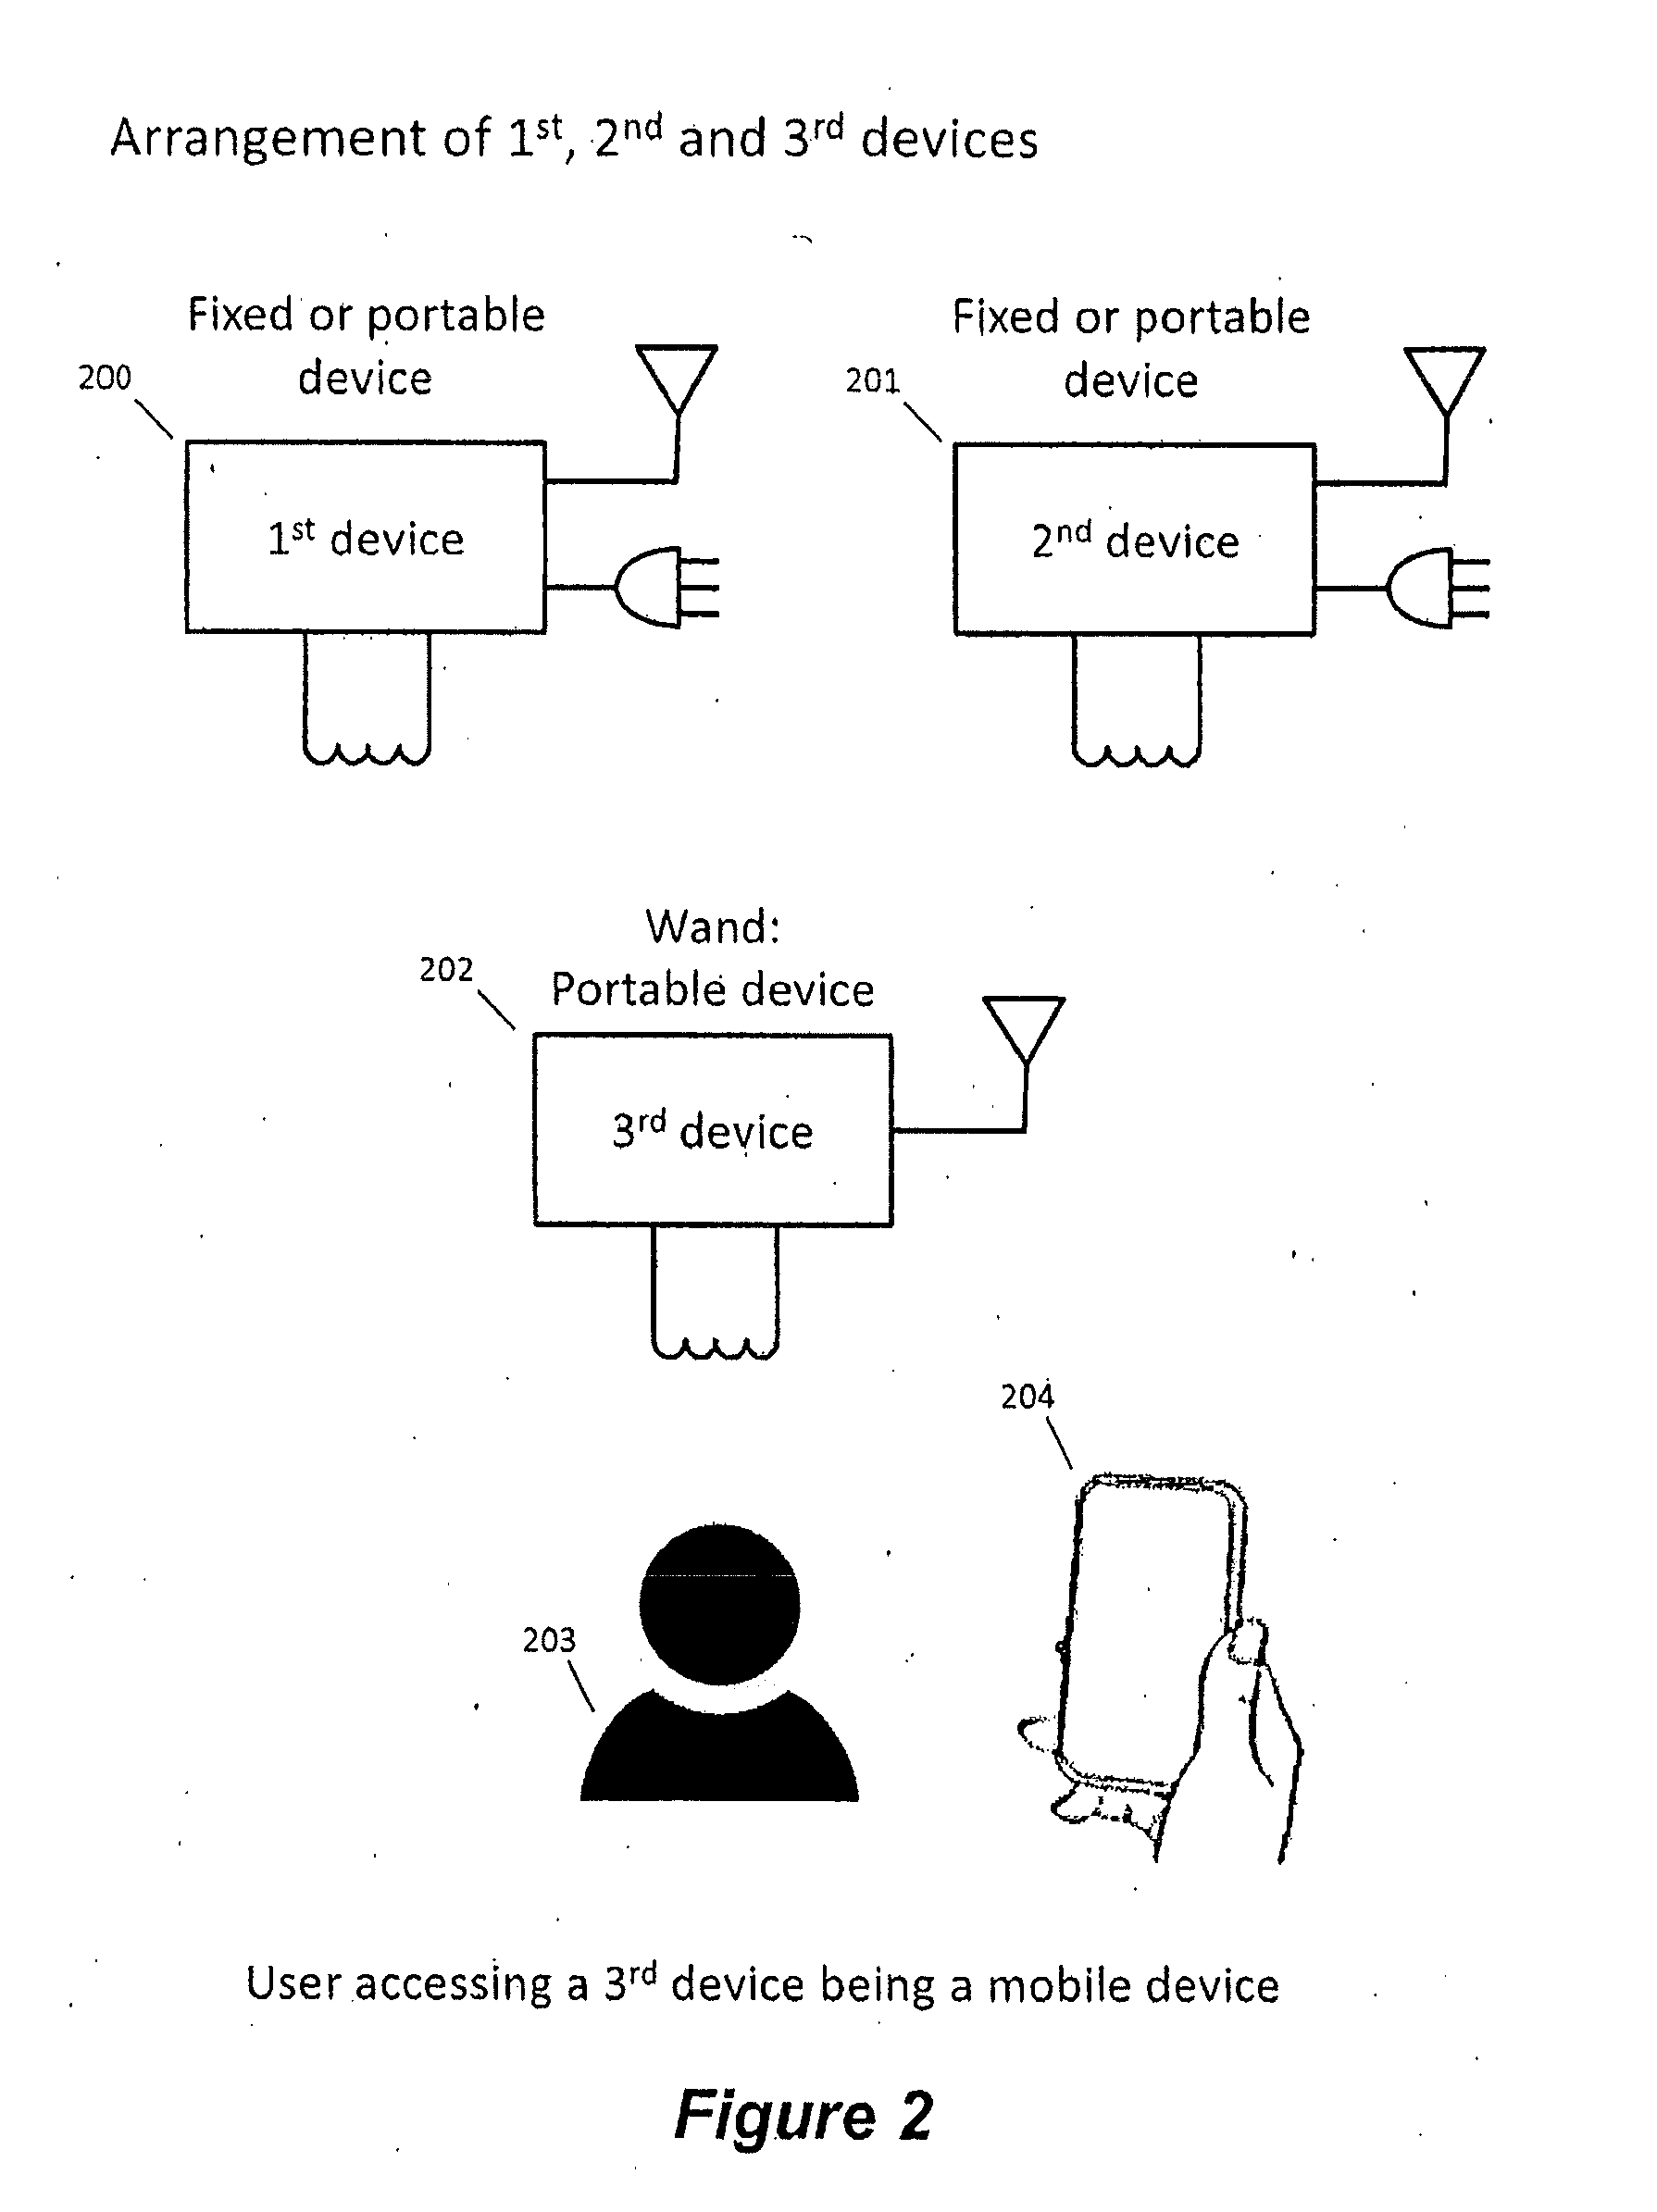 Method and apparatus for forming associations and communicating between devices